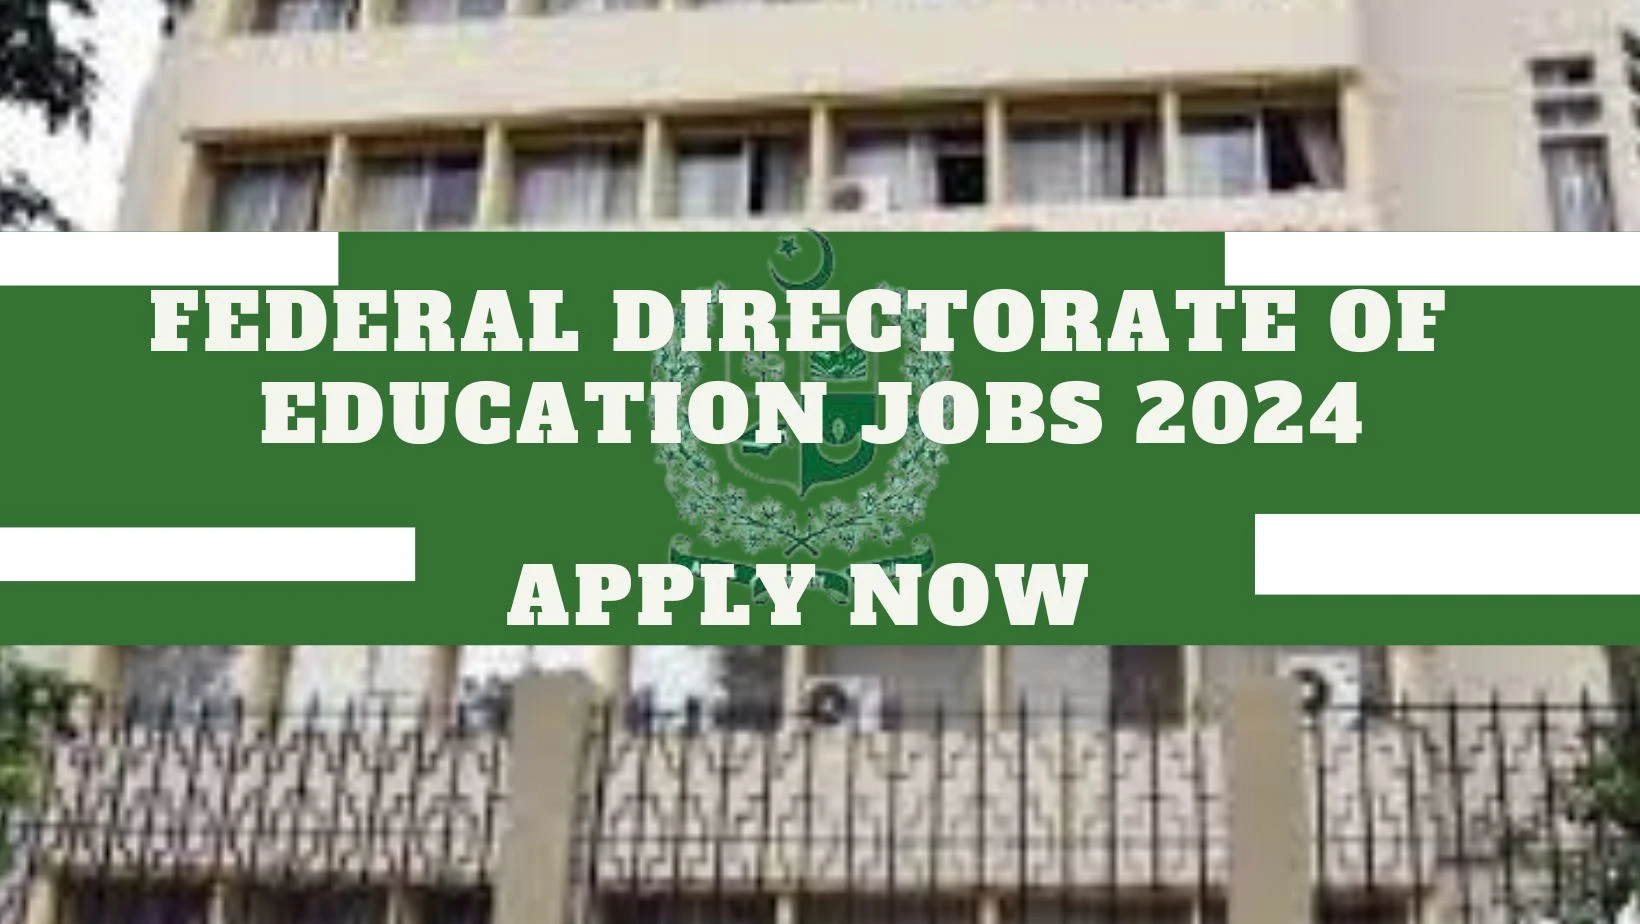 Federal Directorate of Education